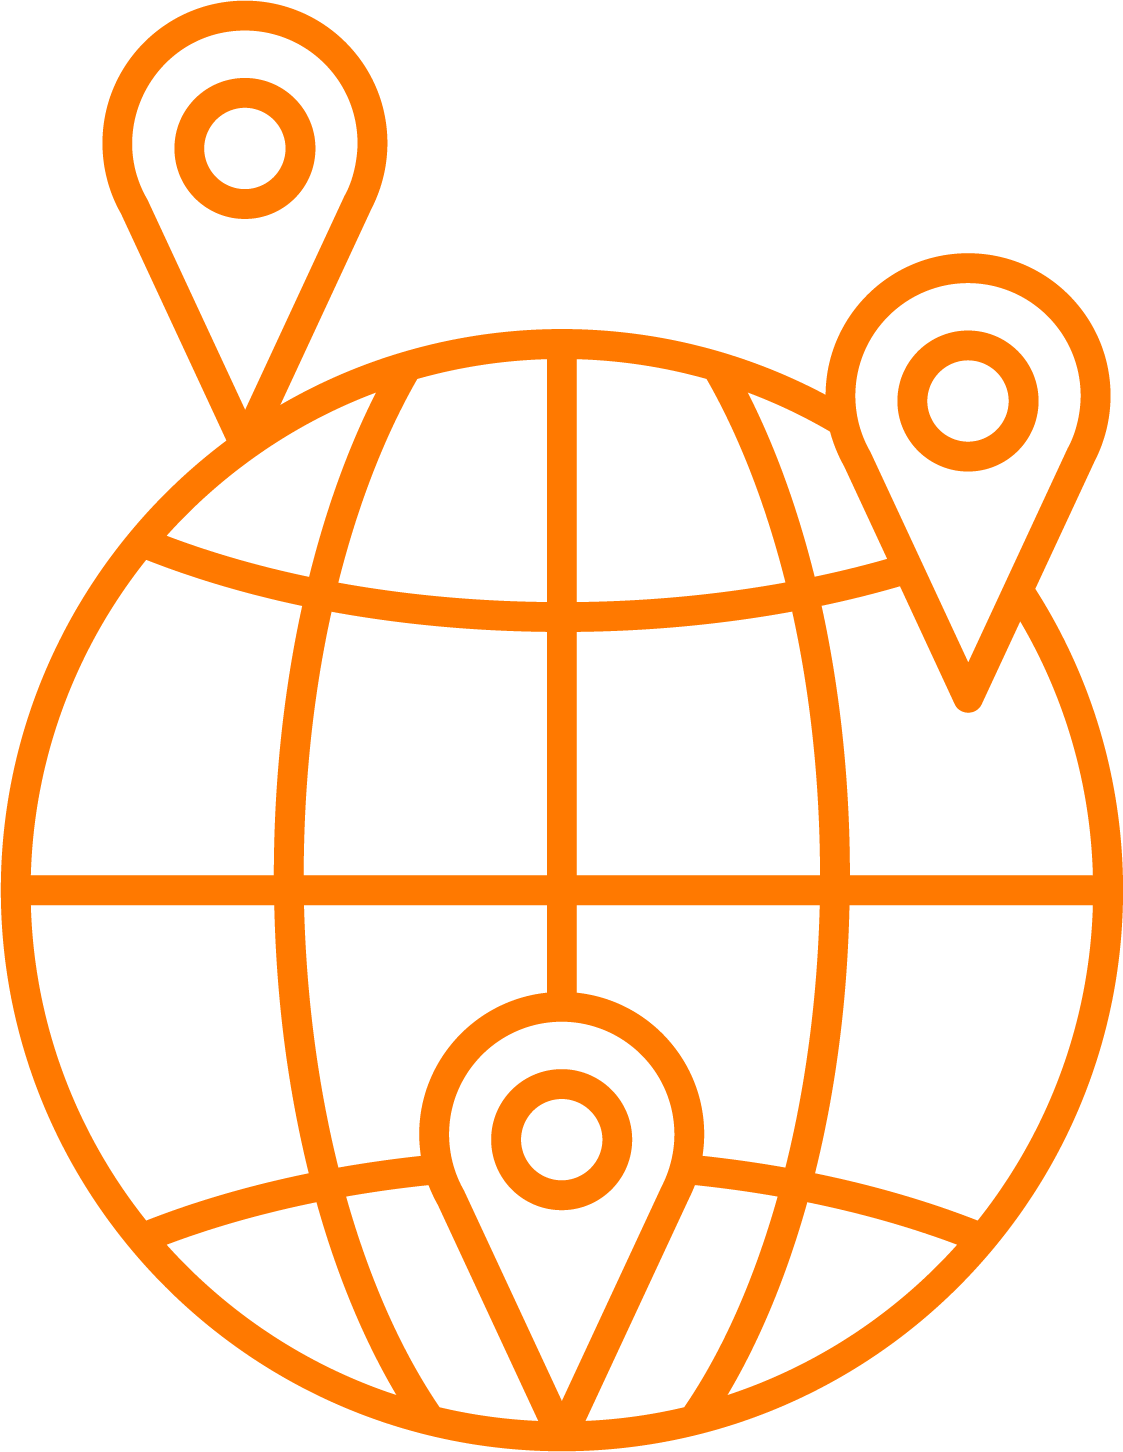 Icon of a globe with three pins placed on it